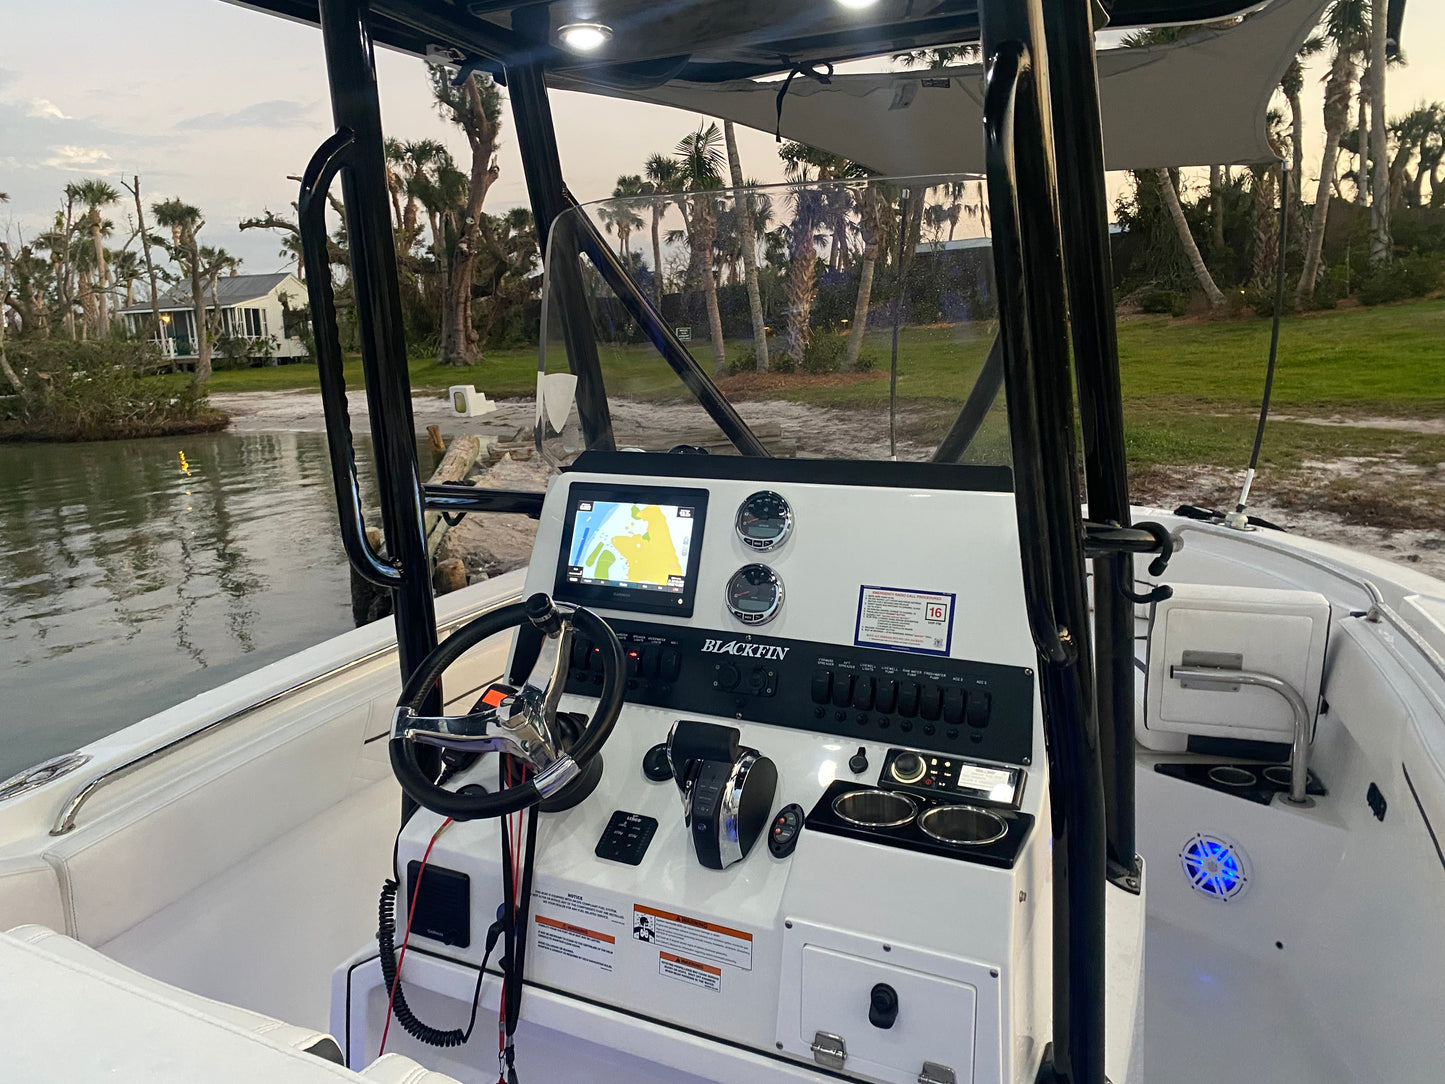 2021 Blackfin 222 With Trailer Low Hours Located In Shelter Island San Diego. Ca